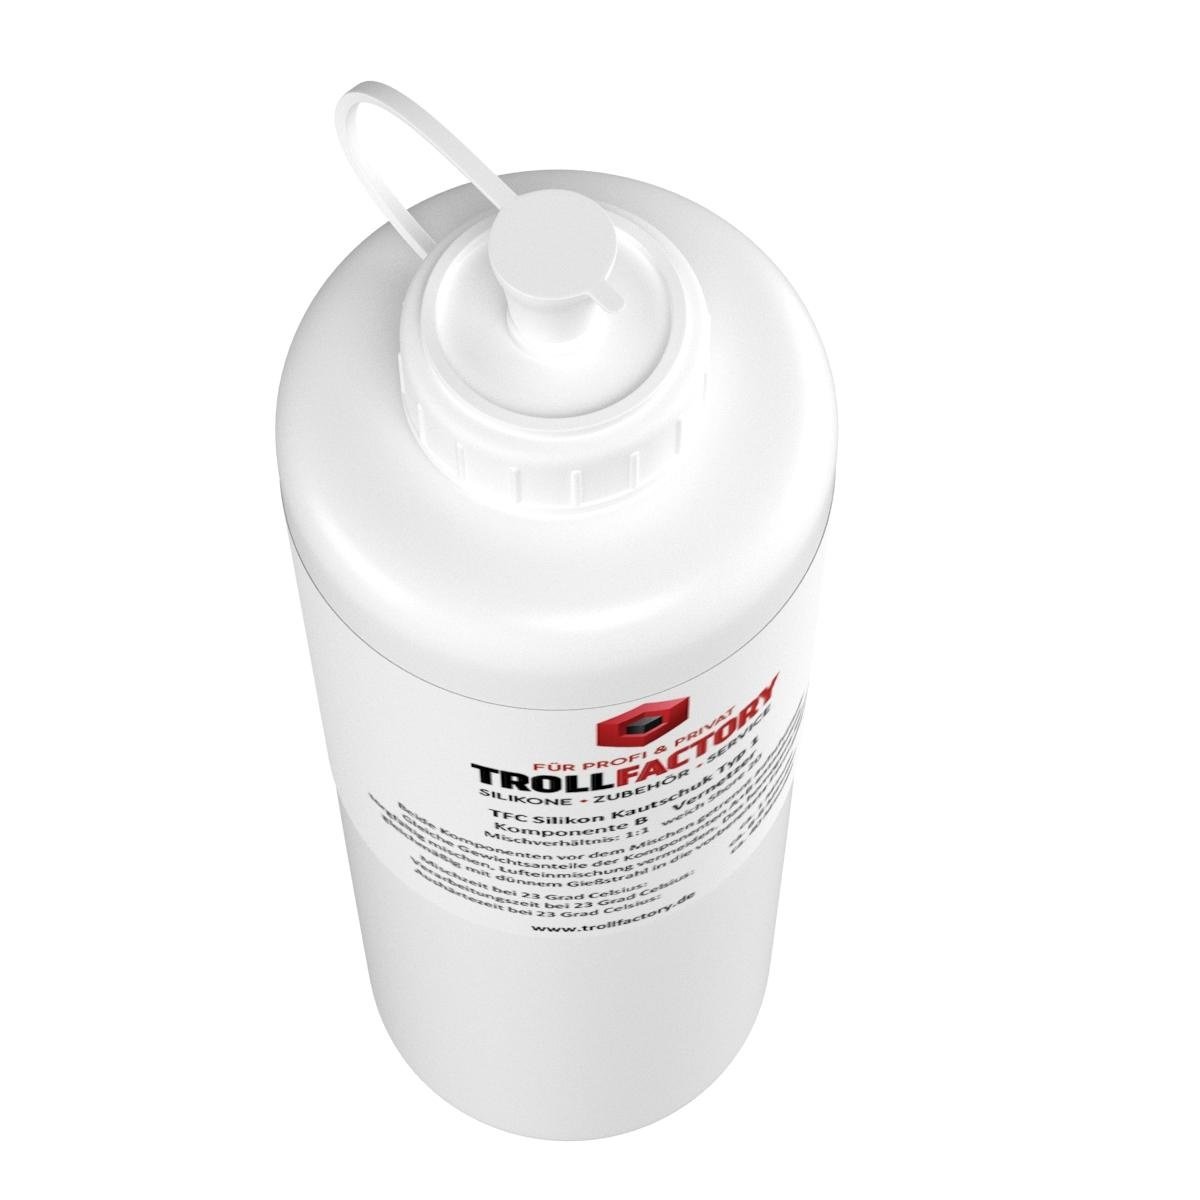 Troll Factory TFC Troll Factory Silicone Rubber Type 1 Afvorm silicone zacht 500g